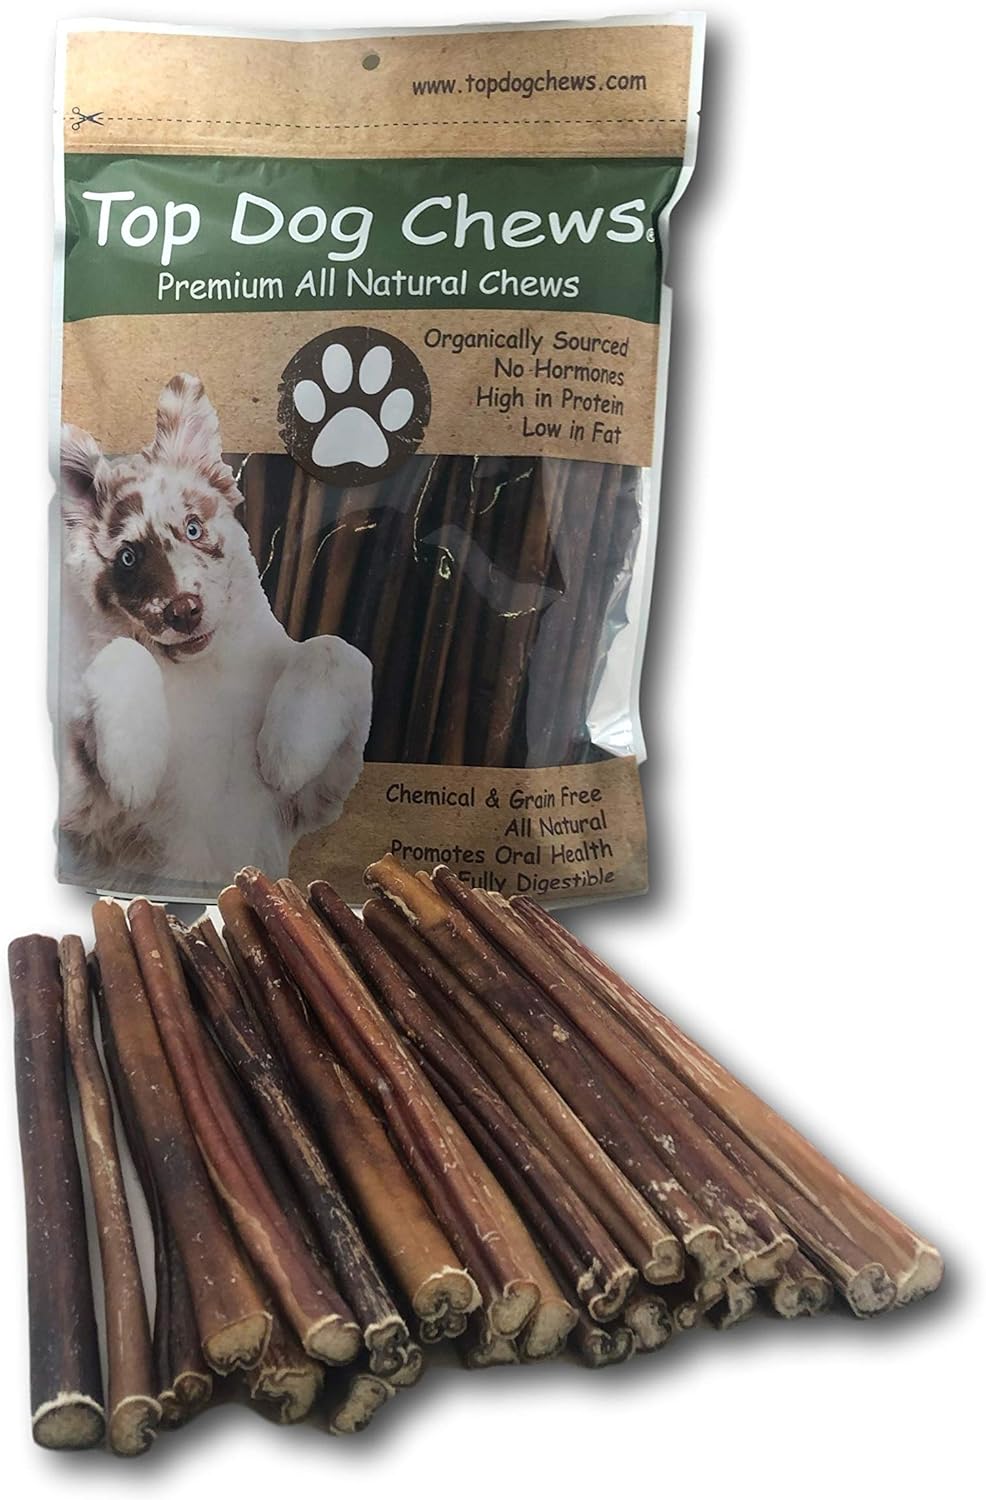 Top Dog Chews - 12 Inch Bully Sticks, 100% Natural Beef, Free Range, Grass Fed, High Protein, Supports Dental Health & Easily Digestible, Thick Dog Treat, 20 Pack